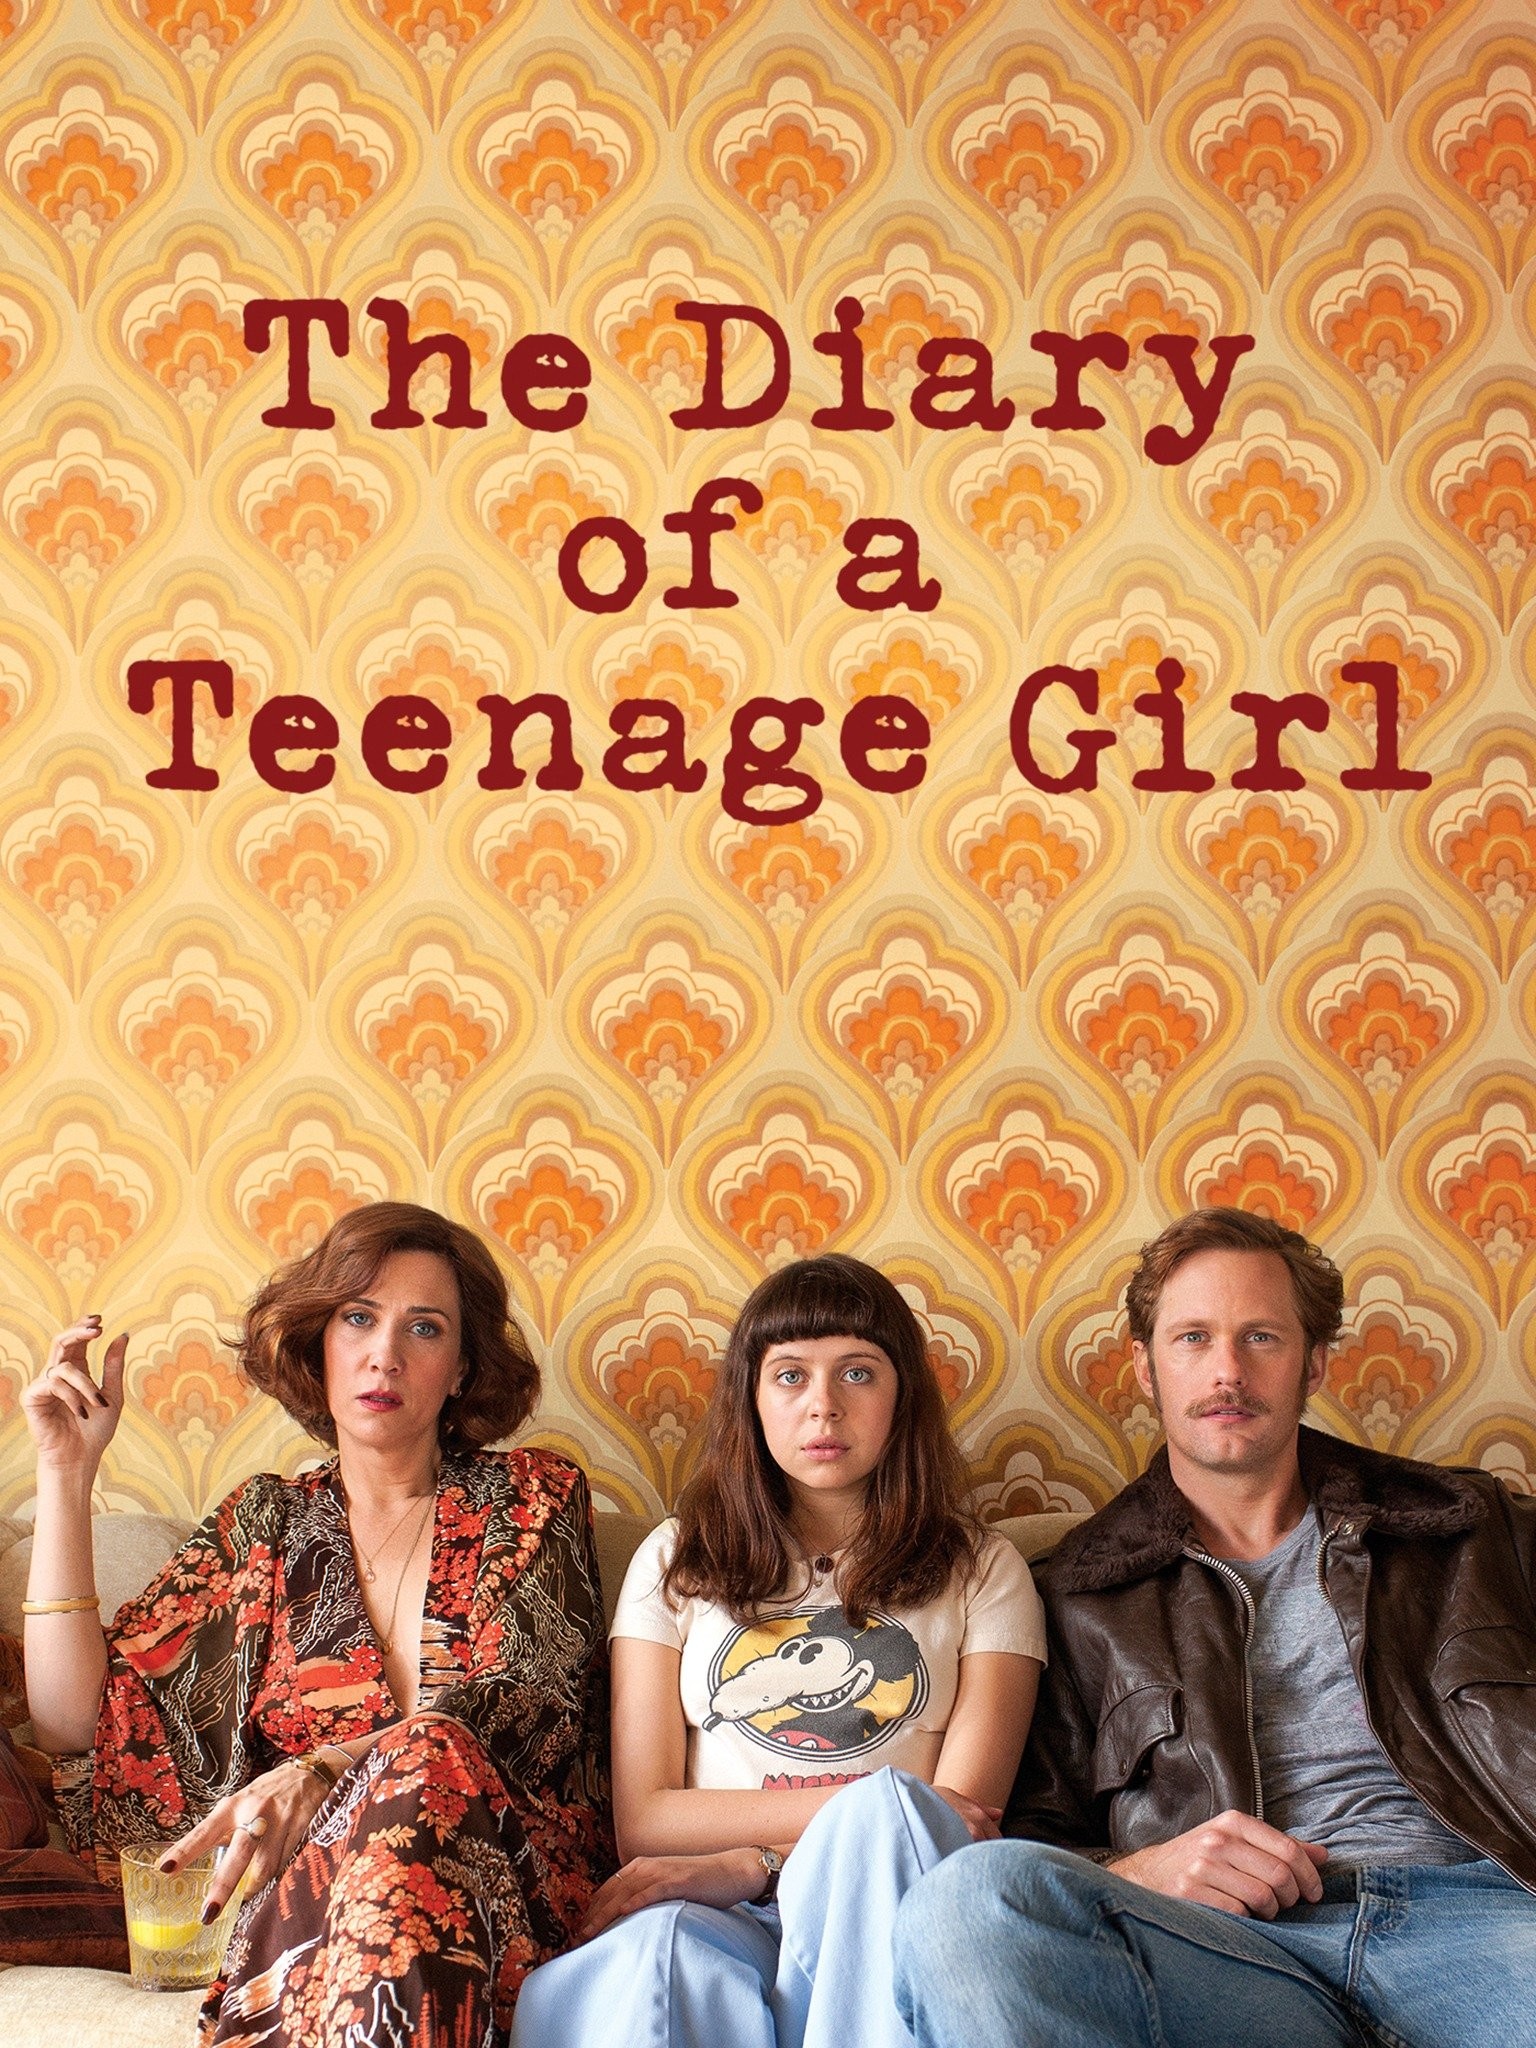 The Diary of a Teenage Girl - Rotten Tomatoes